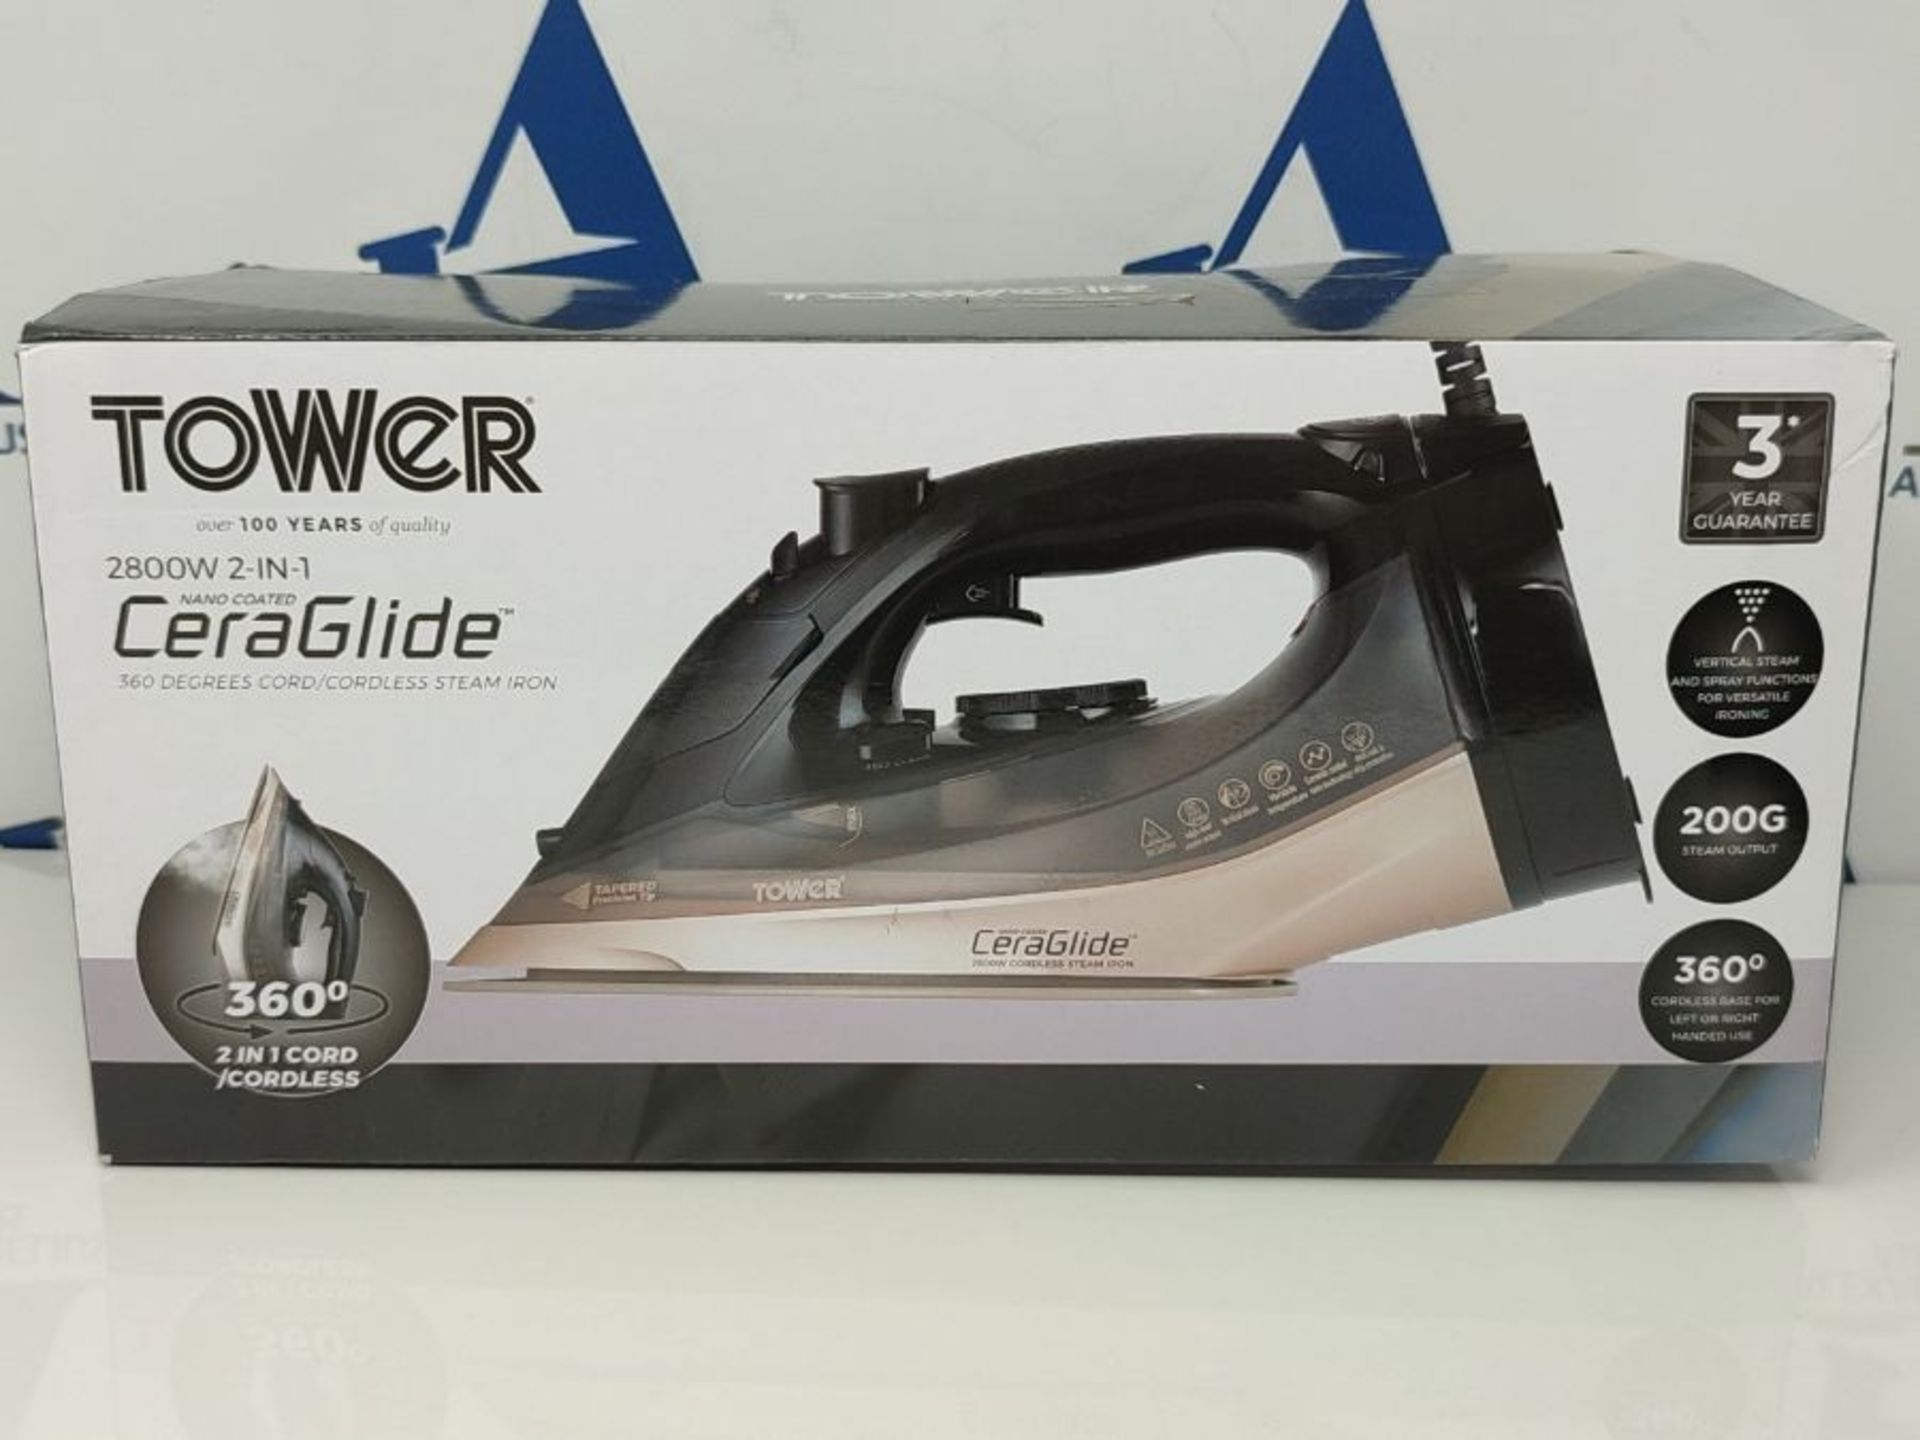 Tower Ceraglide T22019GLD 2 in 1 Cord or Cordless Steam Iron with Ceramic Soleplate, A - Image 2 of 3